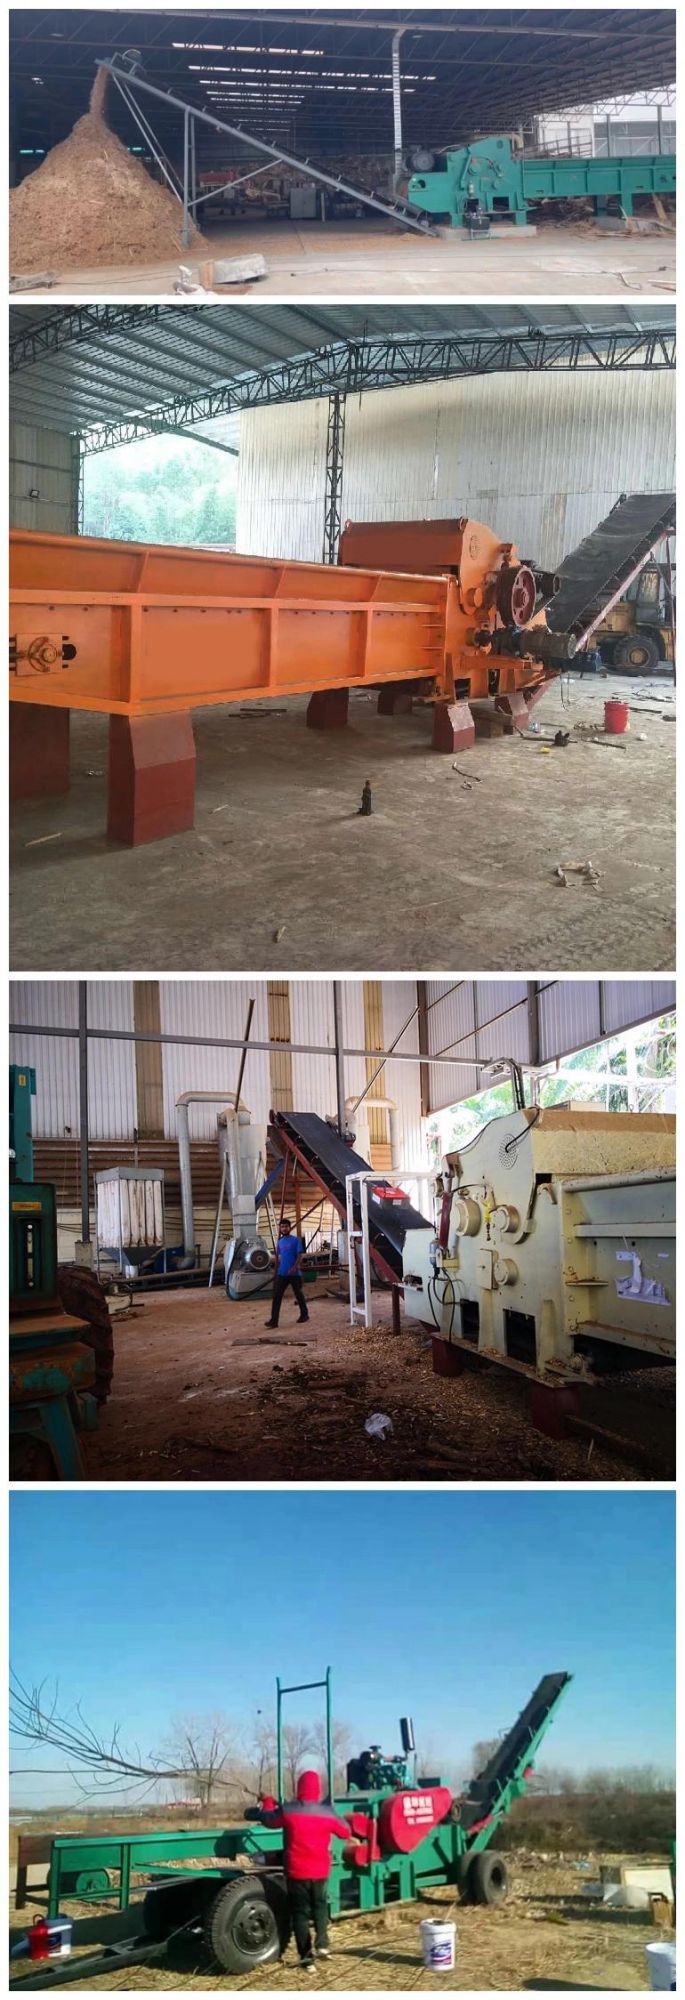 Wood Pellet Chipper Shredder Wood Chips Making Machine with High Quality